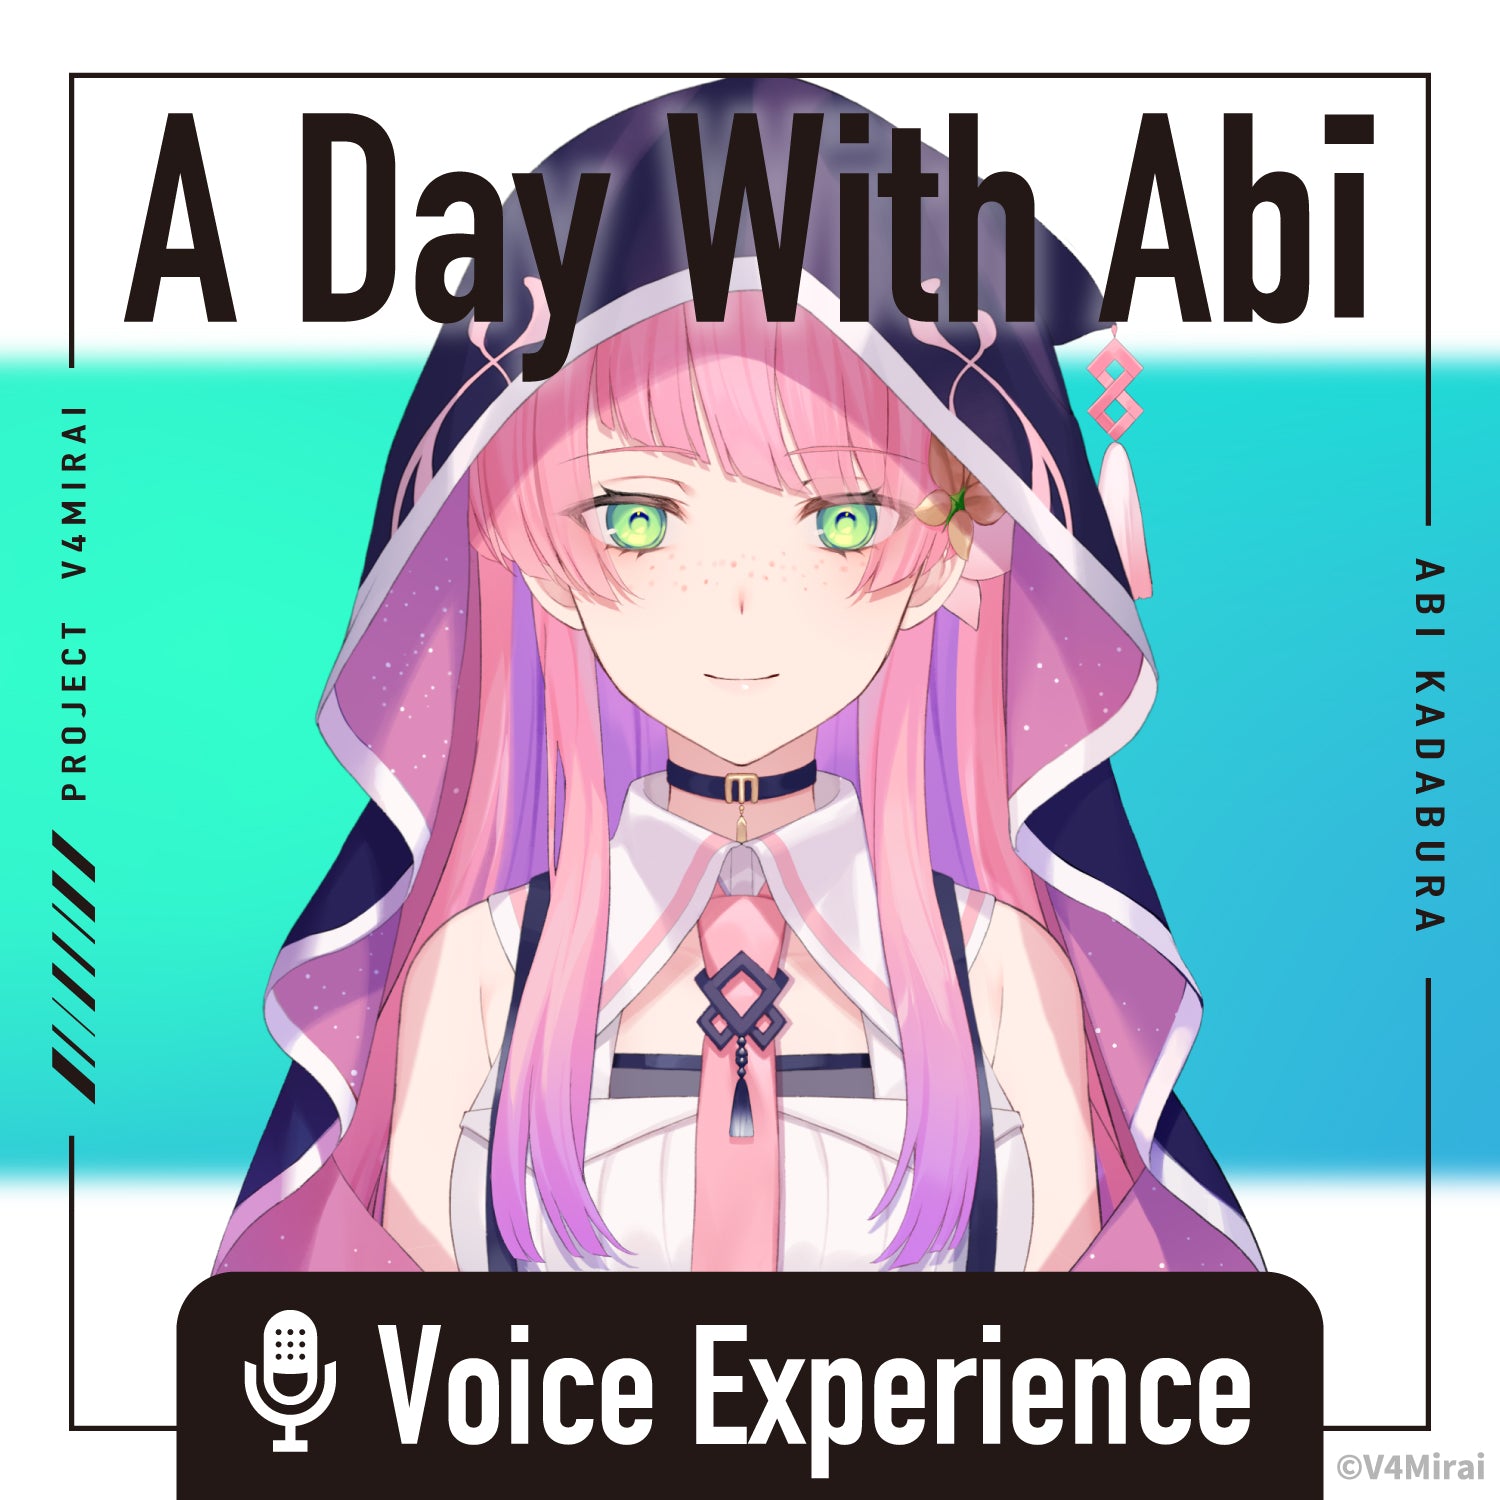 A Day With Abi - Voice Experience